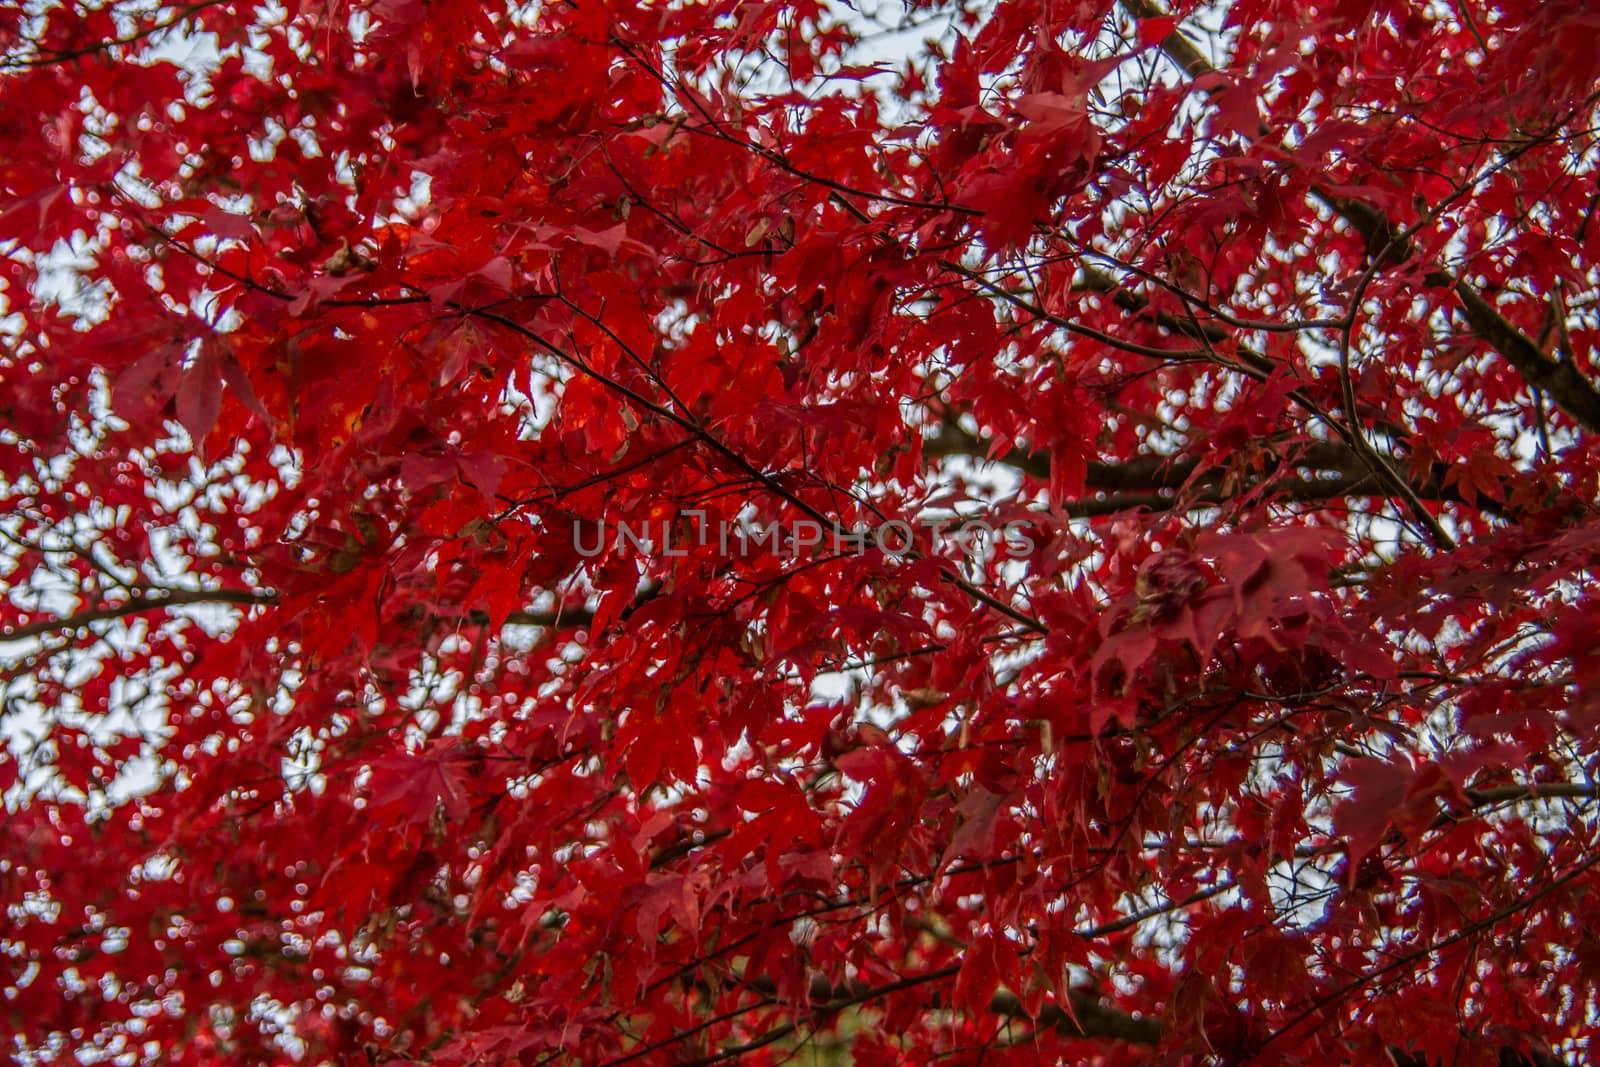 blood-red autumnal leaves on branches